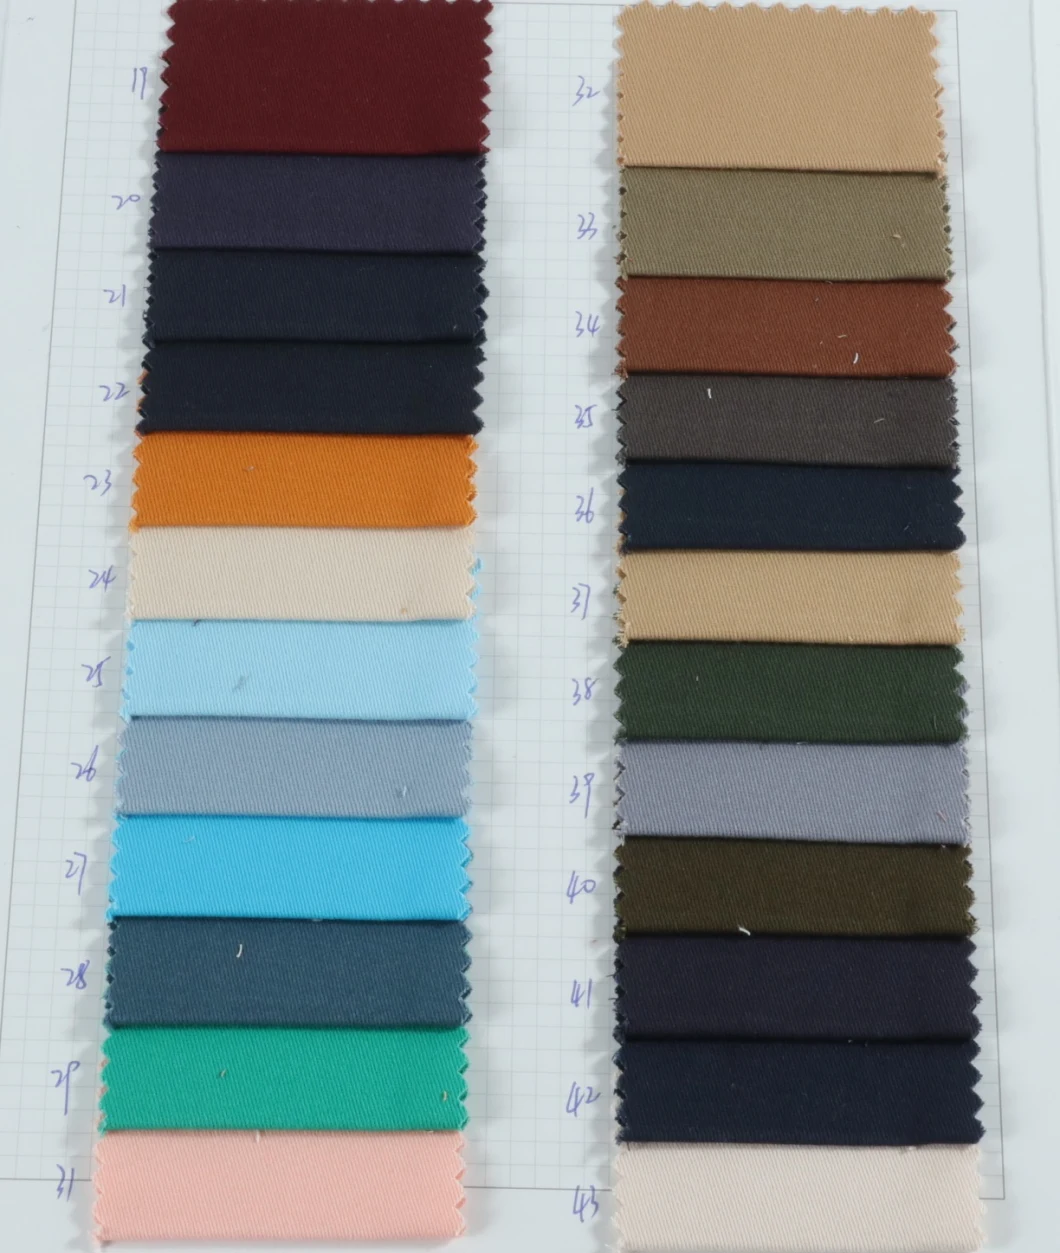 Fashion Stock 100 Cotton Woven Plain Carbon Peach Twill Spandex Dyed Fabric for Garment Fabric